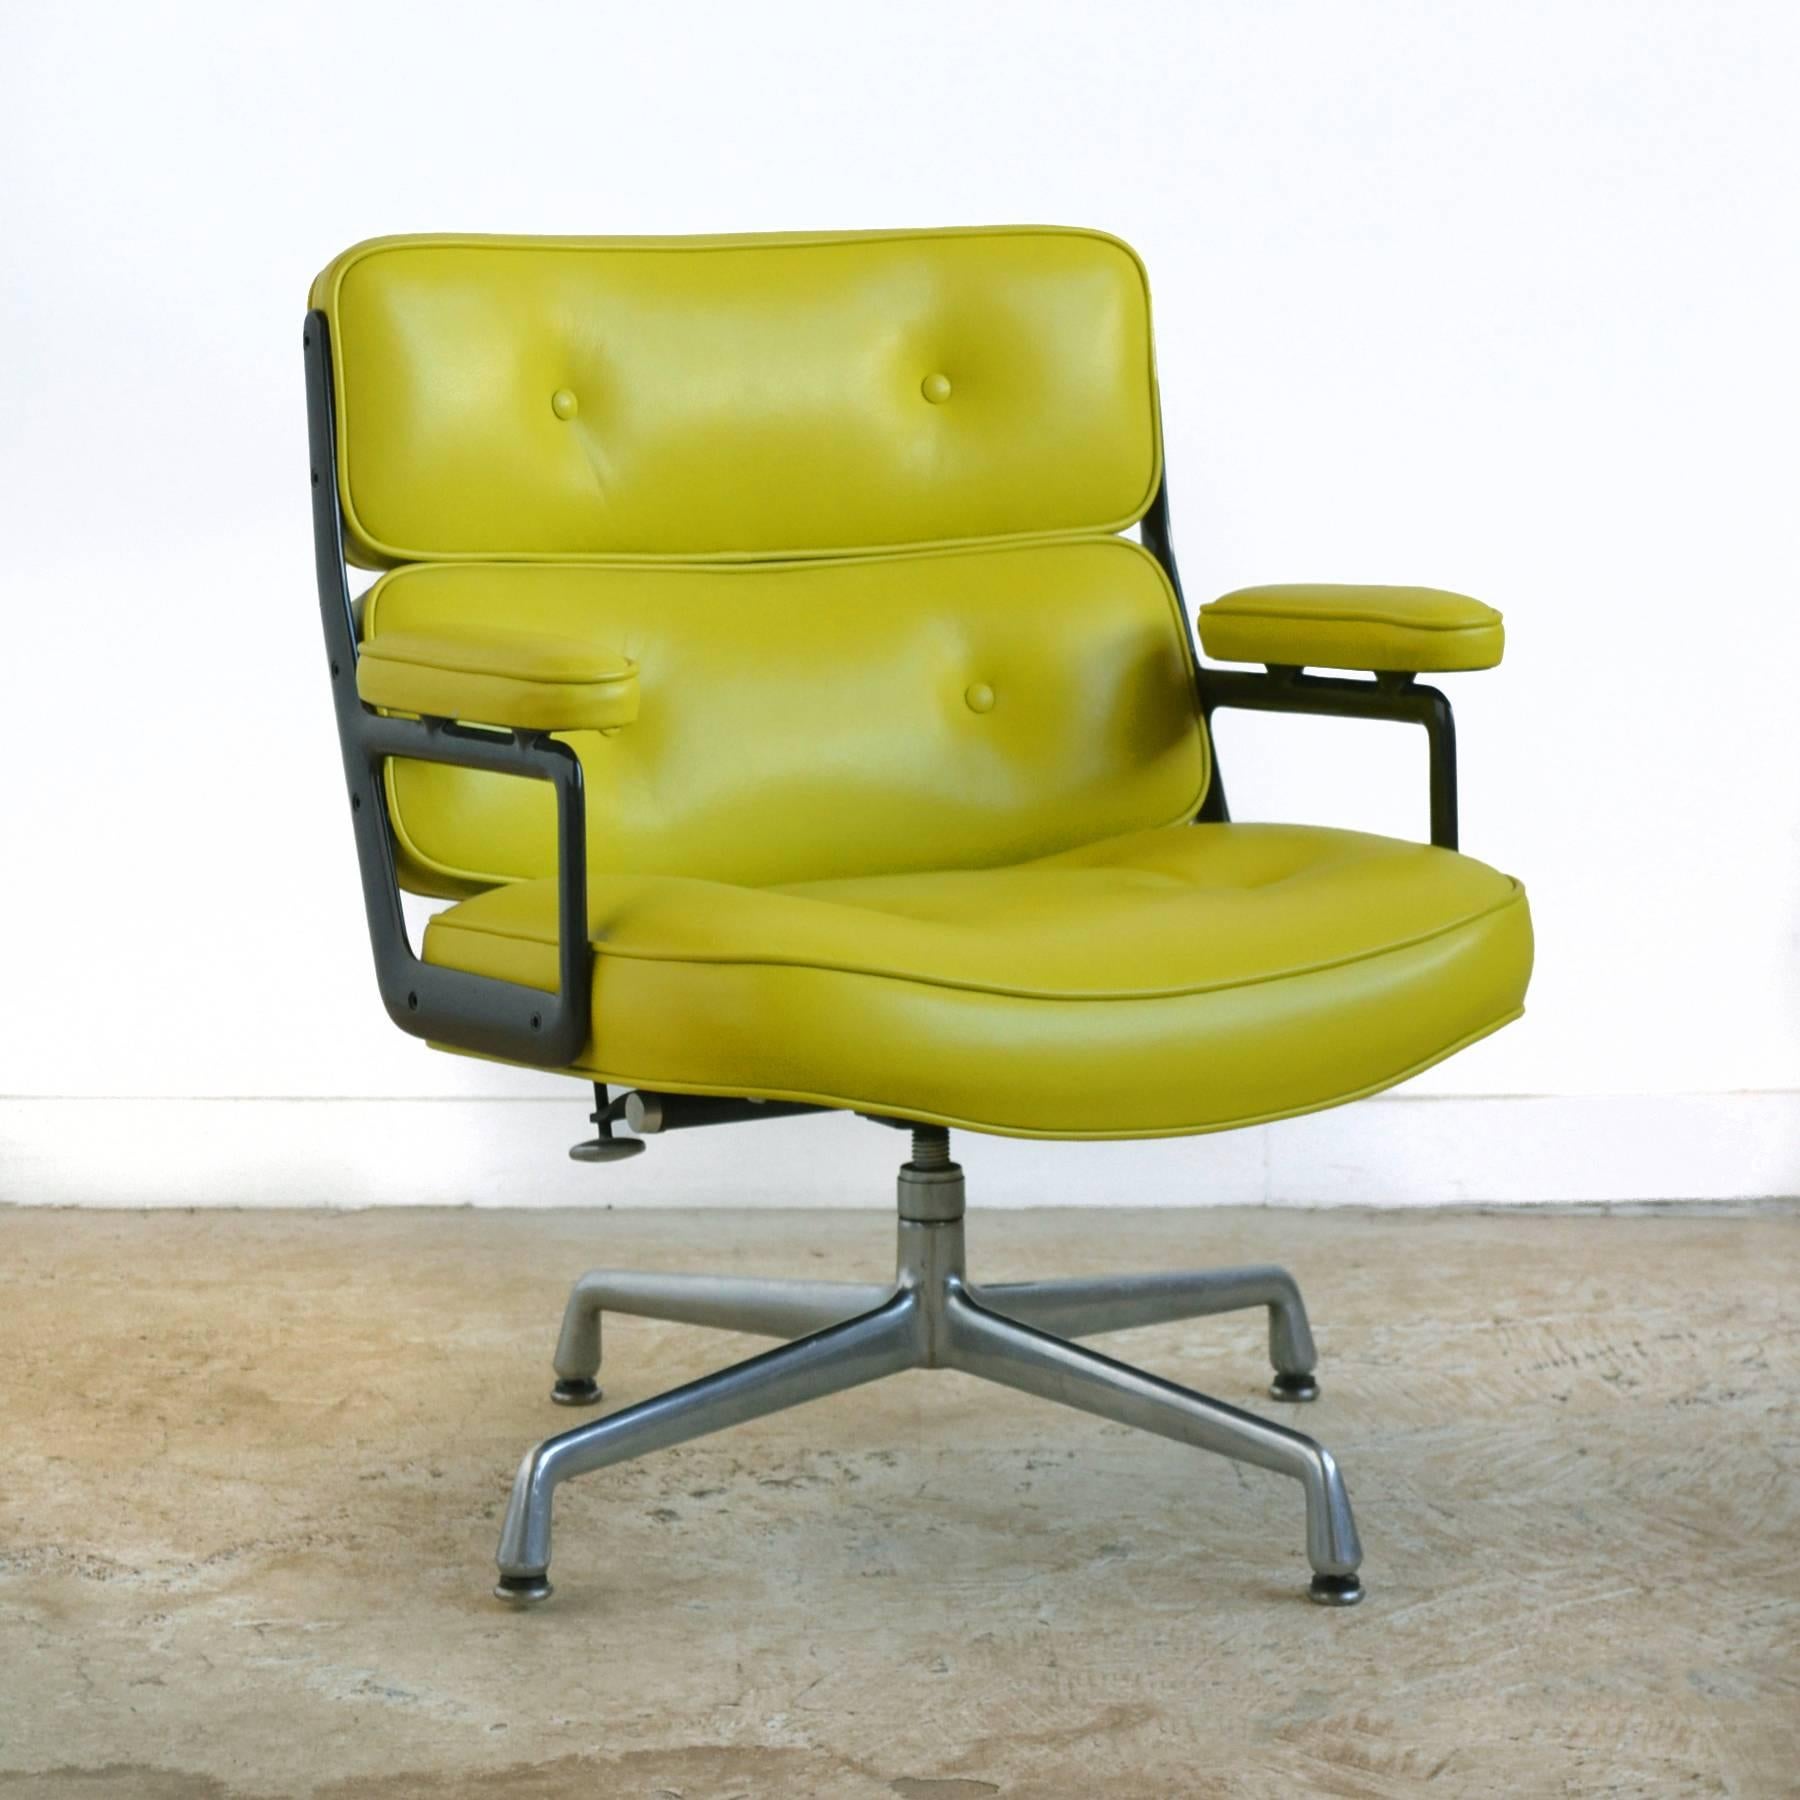 This Classic time-life chair by Charles and Ray Eames has been given a makeover with wonderful vivid green leather upholstery. Originally conceived as an easy chair for the reception area of the Time-Life building, the design soon became a favorite